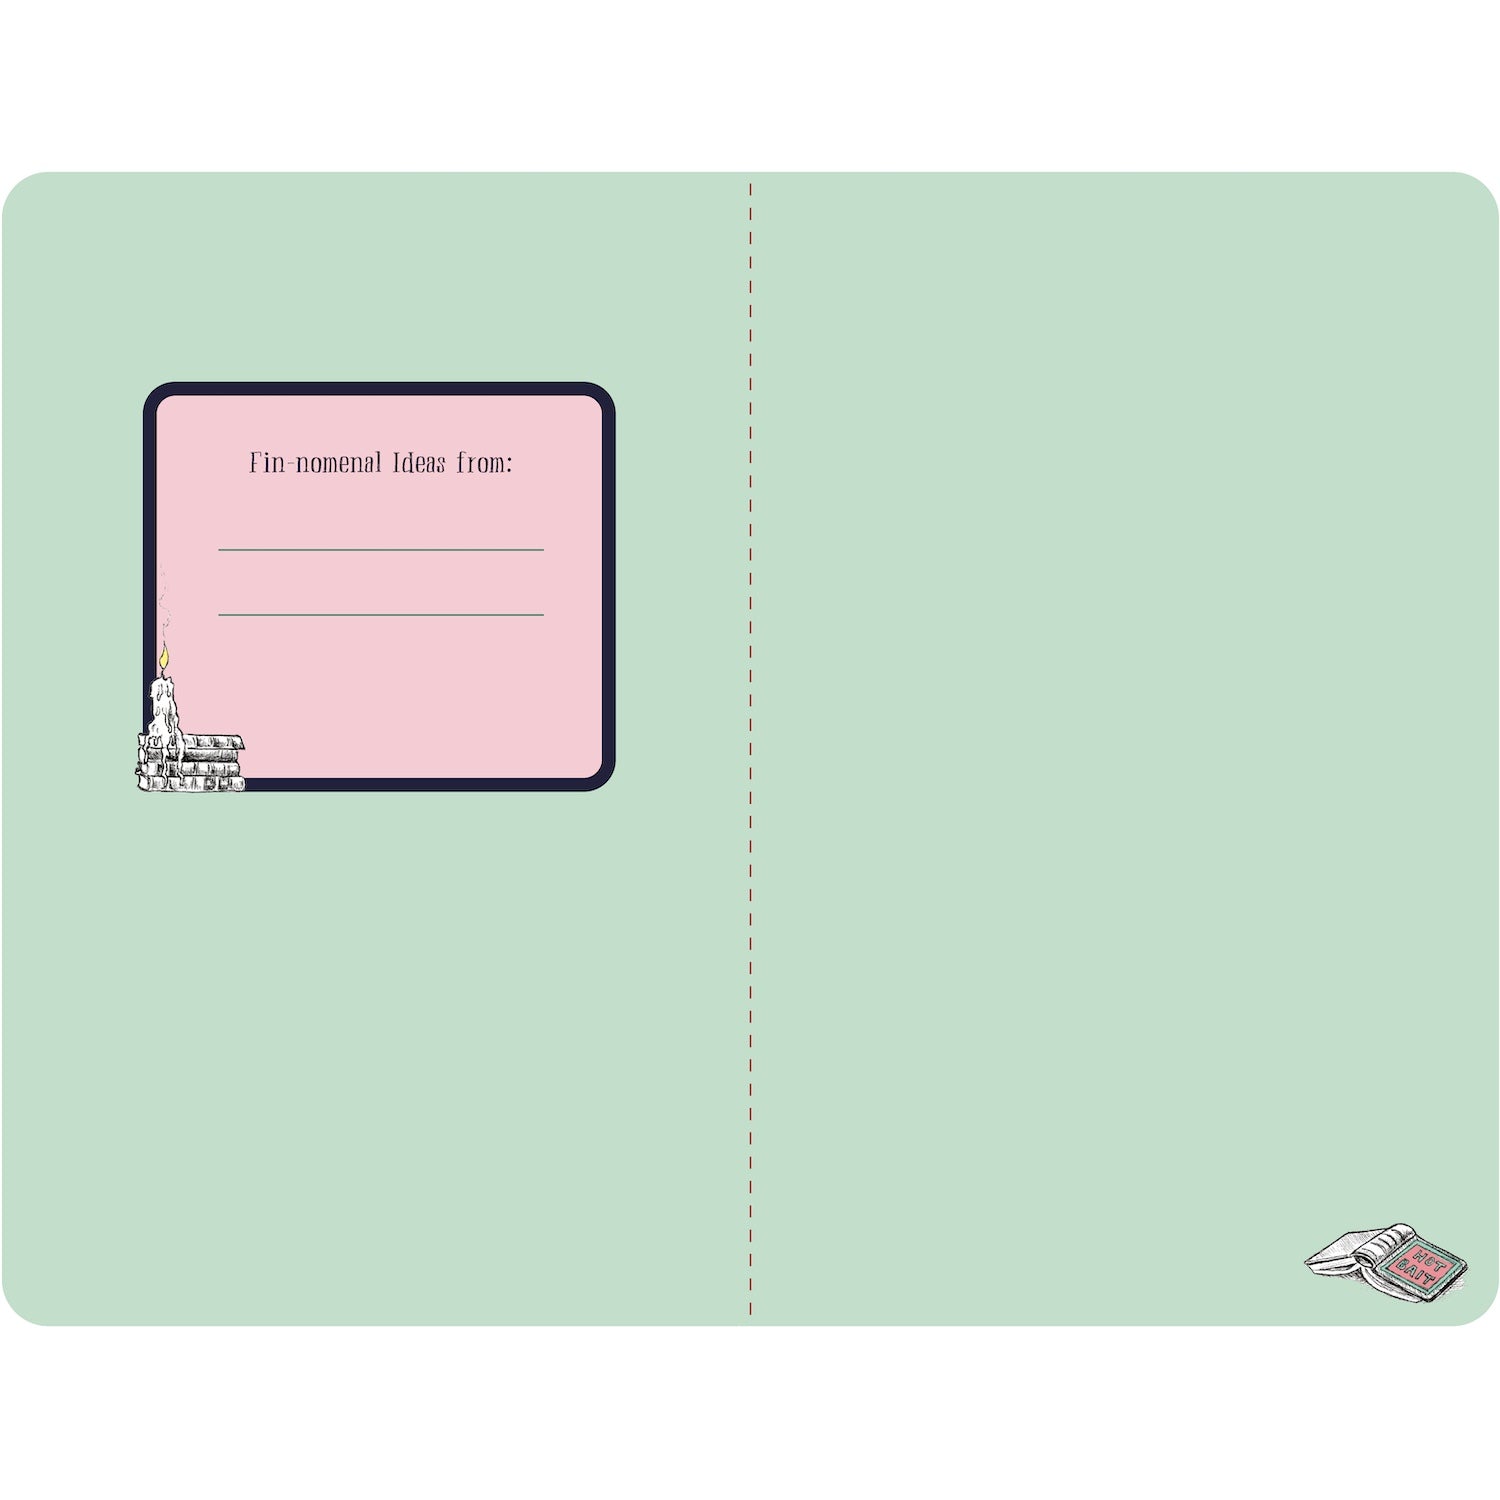 The inside front and back covers of the Deep End Notebook are solid mint green with a box labeled &quot;Fin-omenal ideas from:&quot; and two blank lines in the front, and a small illustrated open book in the lower right corner of the inside back cover. 